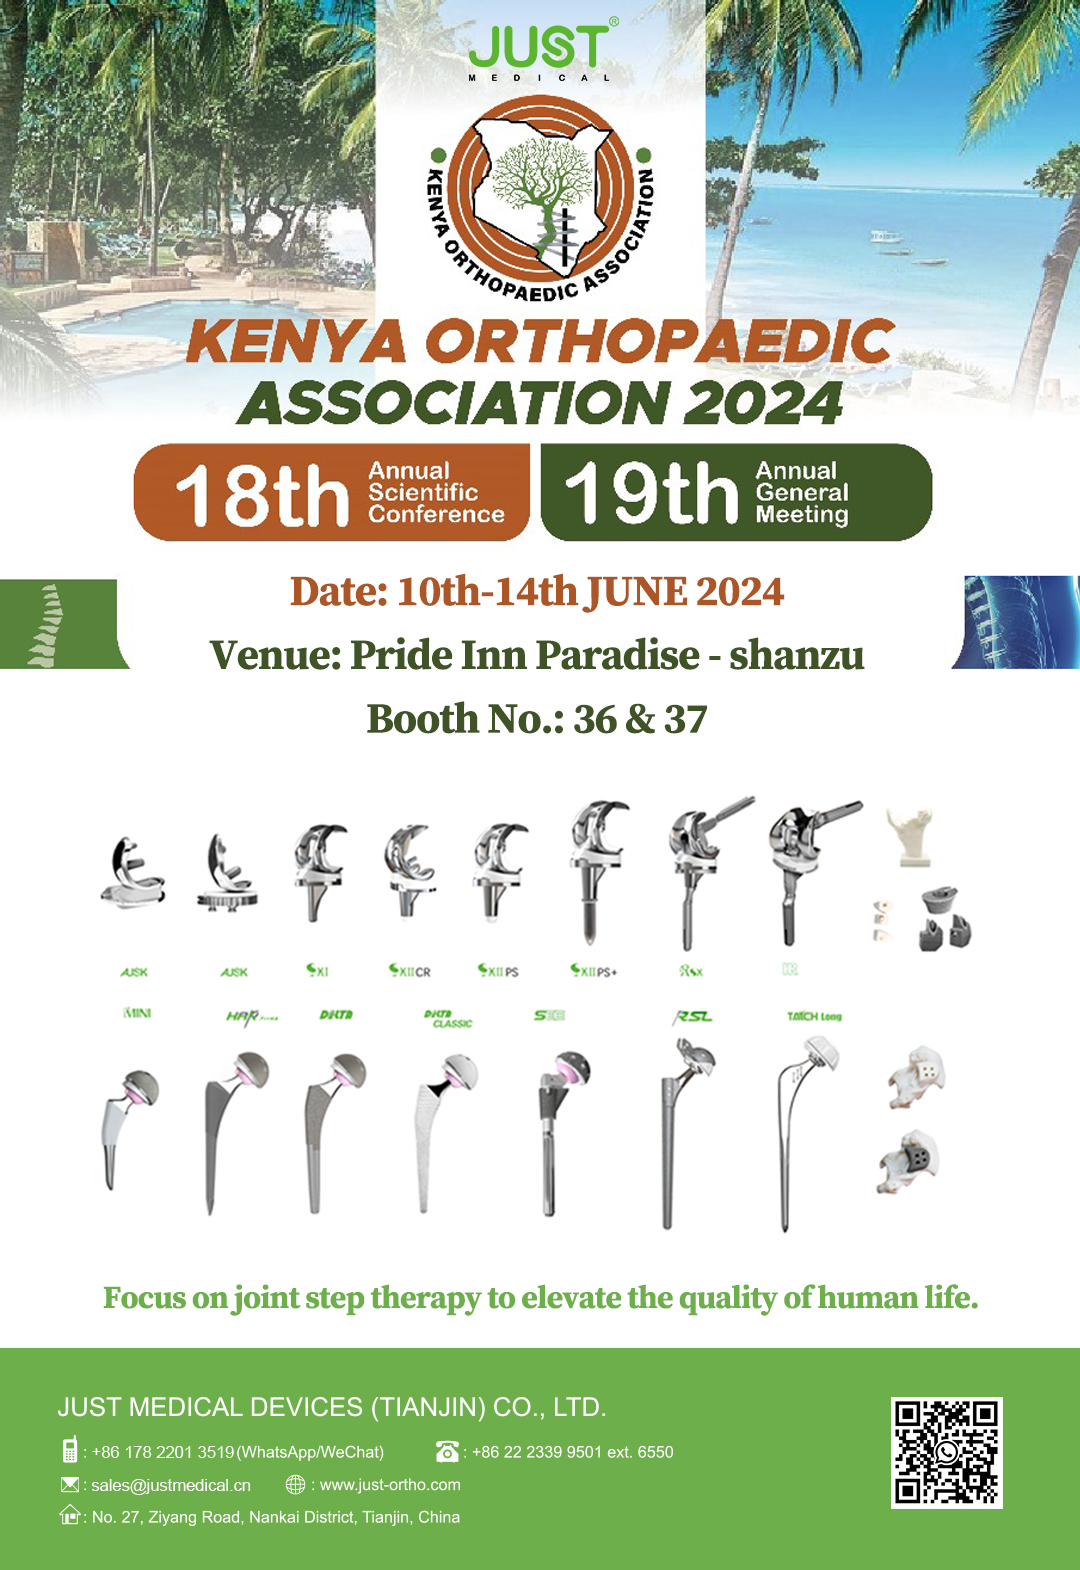 Just Medical Devices (Tianjin) Co., Ltd. to Showcase Full Product Line at Kenya Orthopaedic Association 2024 Conference